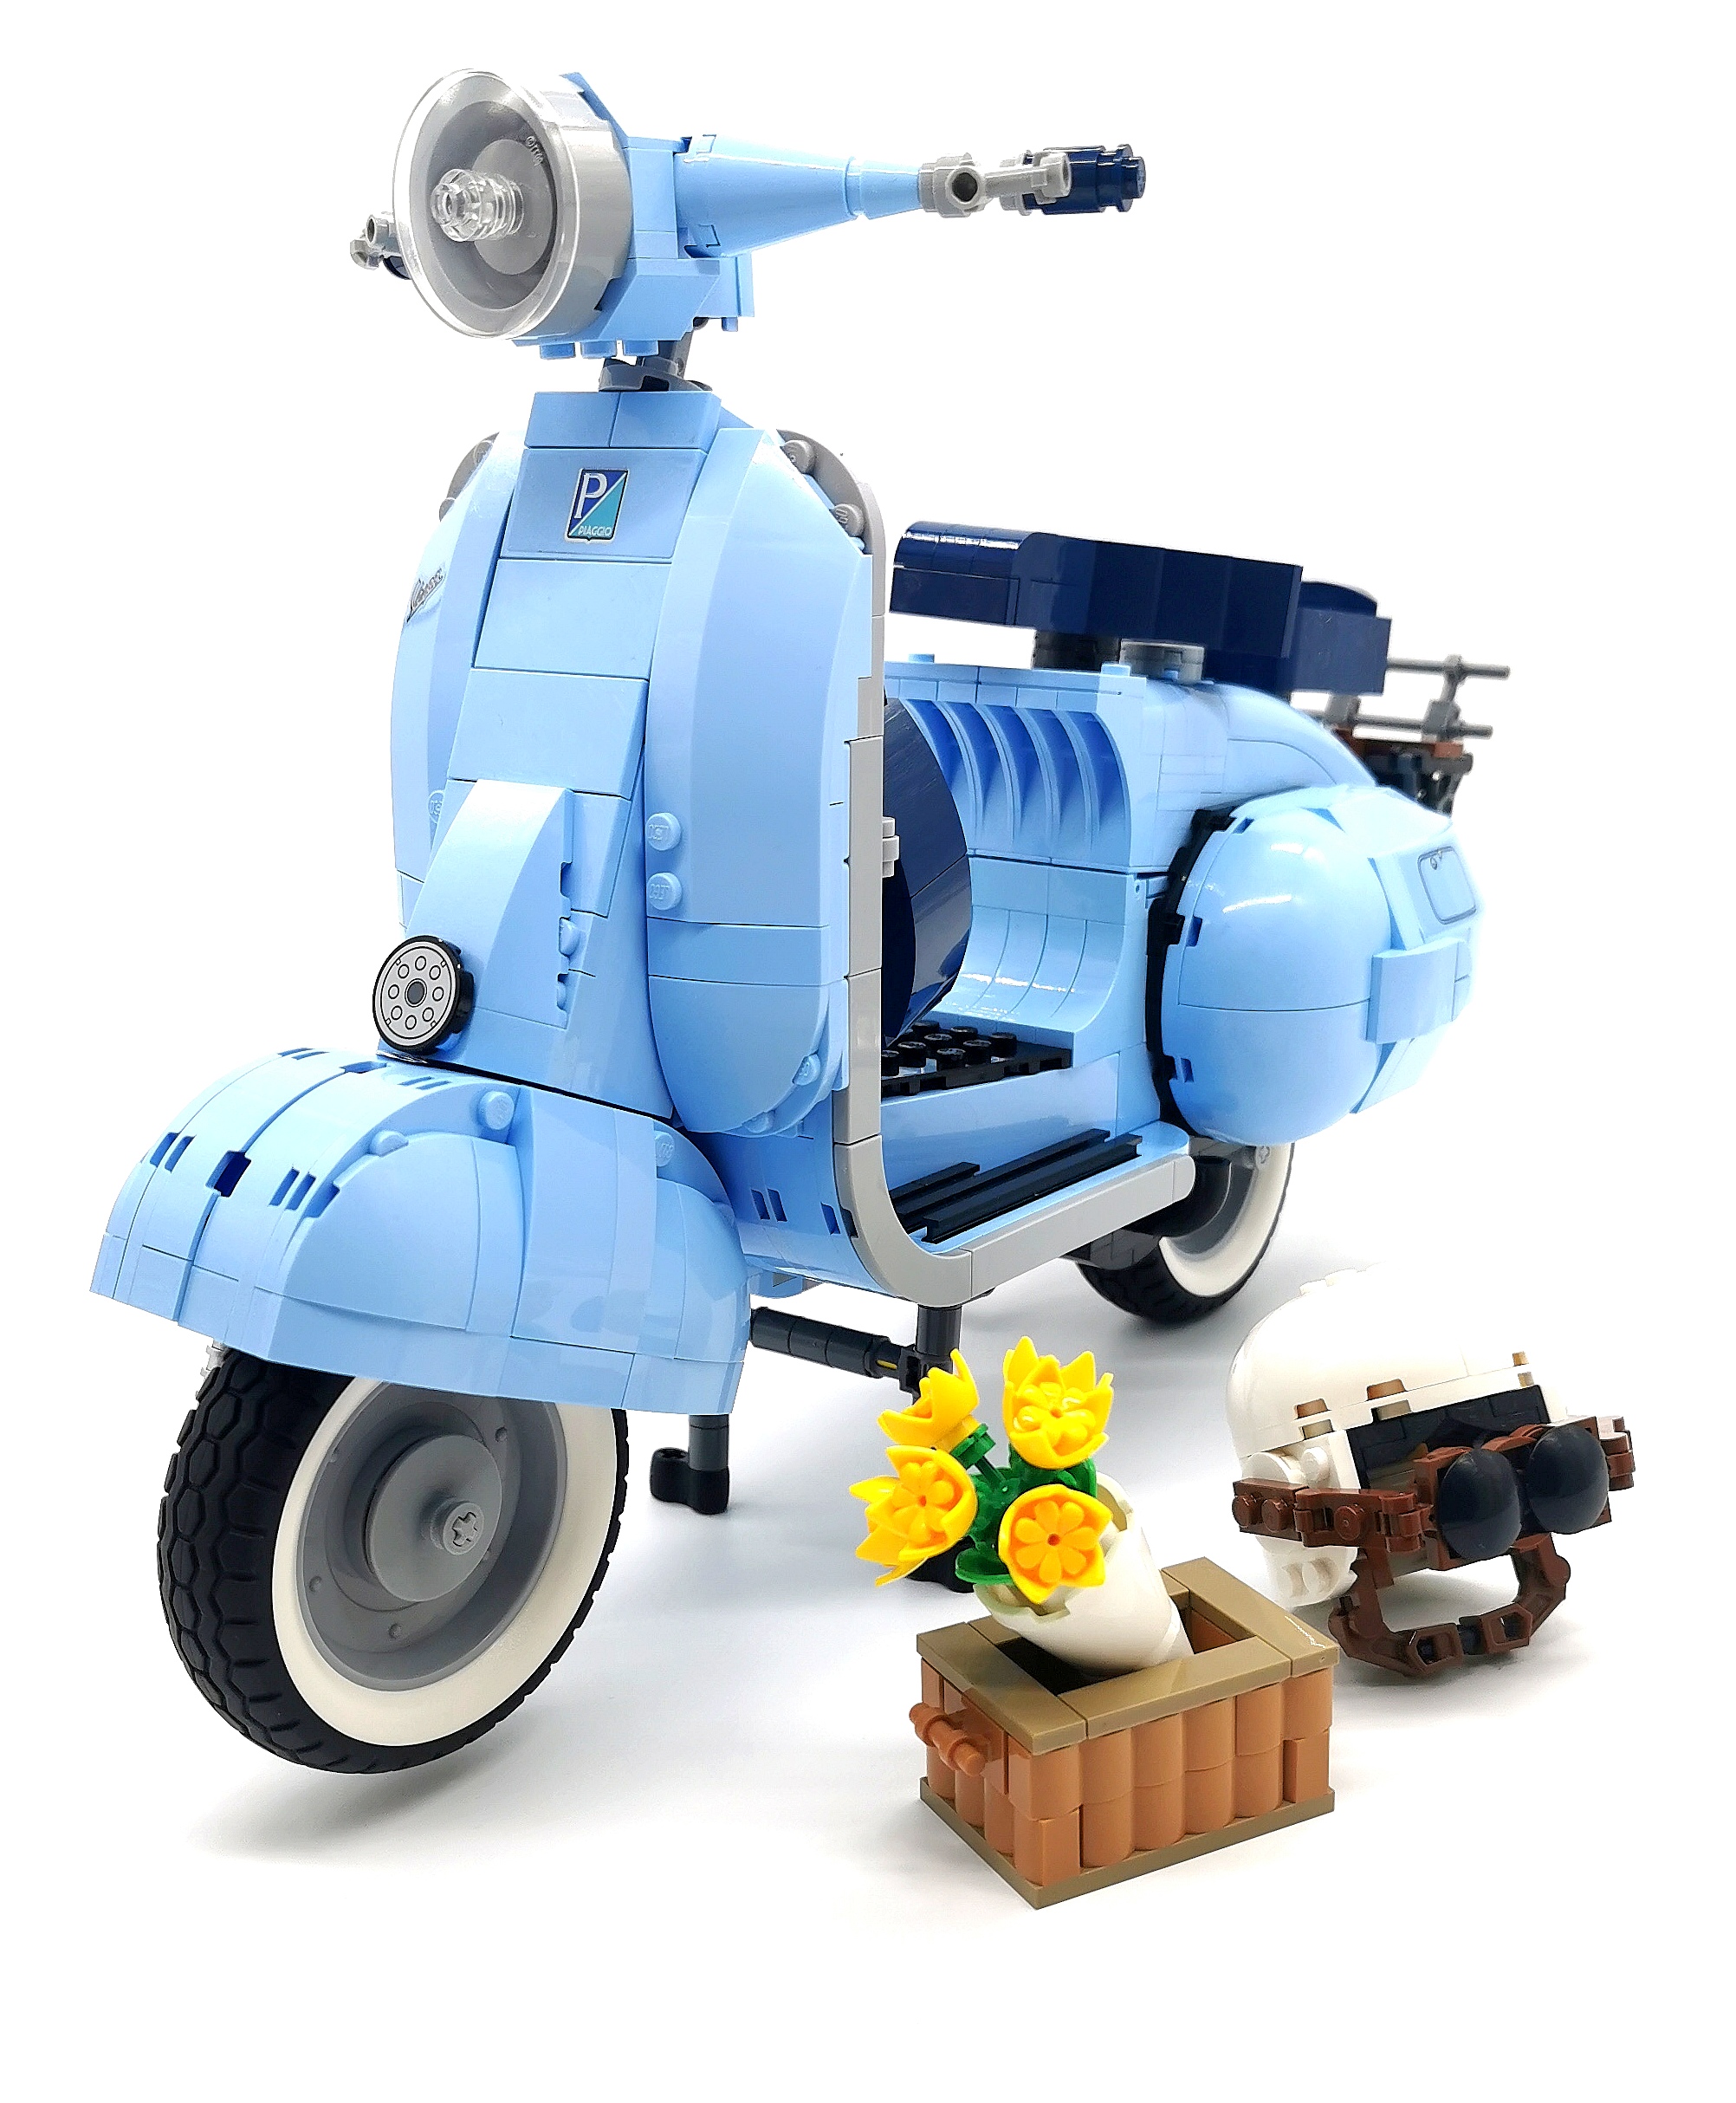 I see your wooden Vespa, and raise you a Lego Vespa.